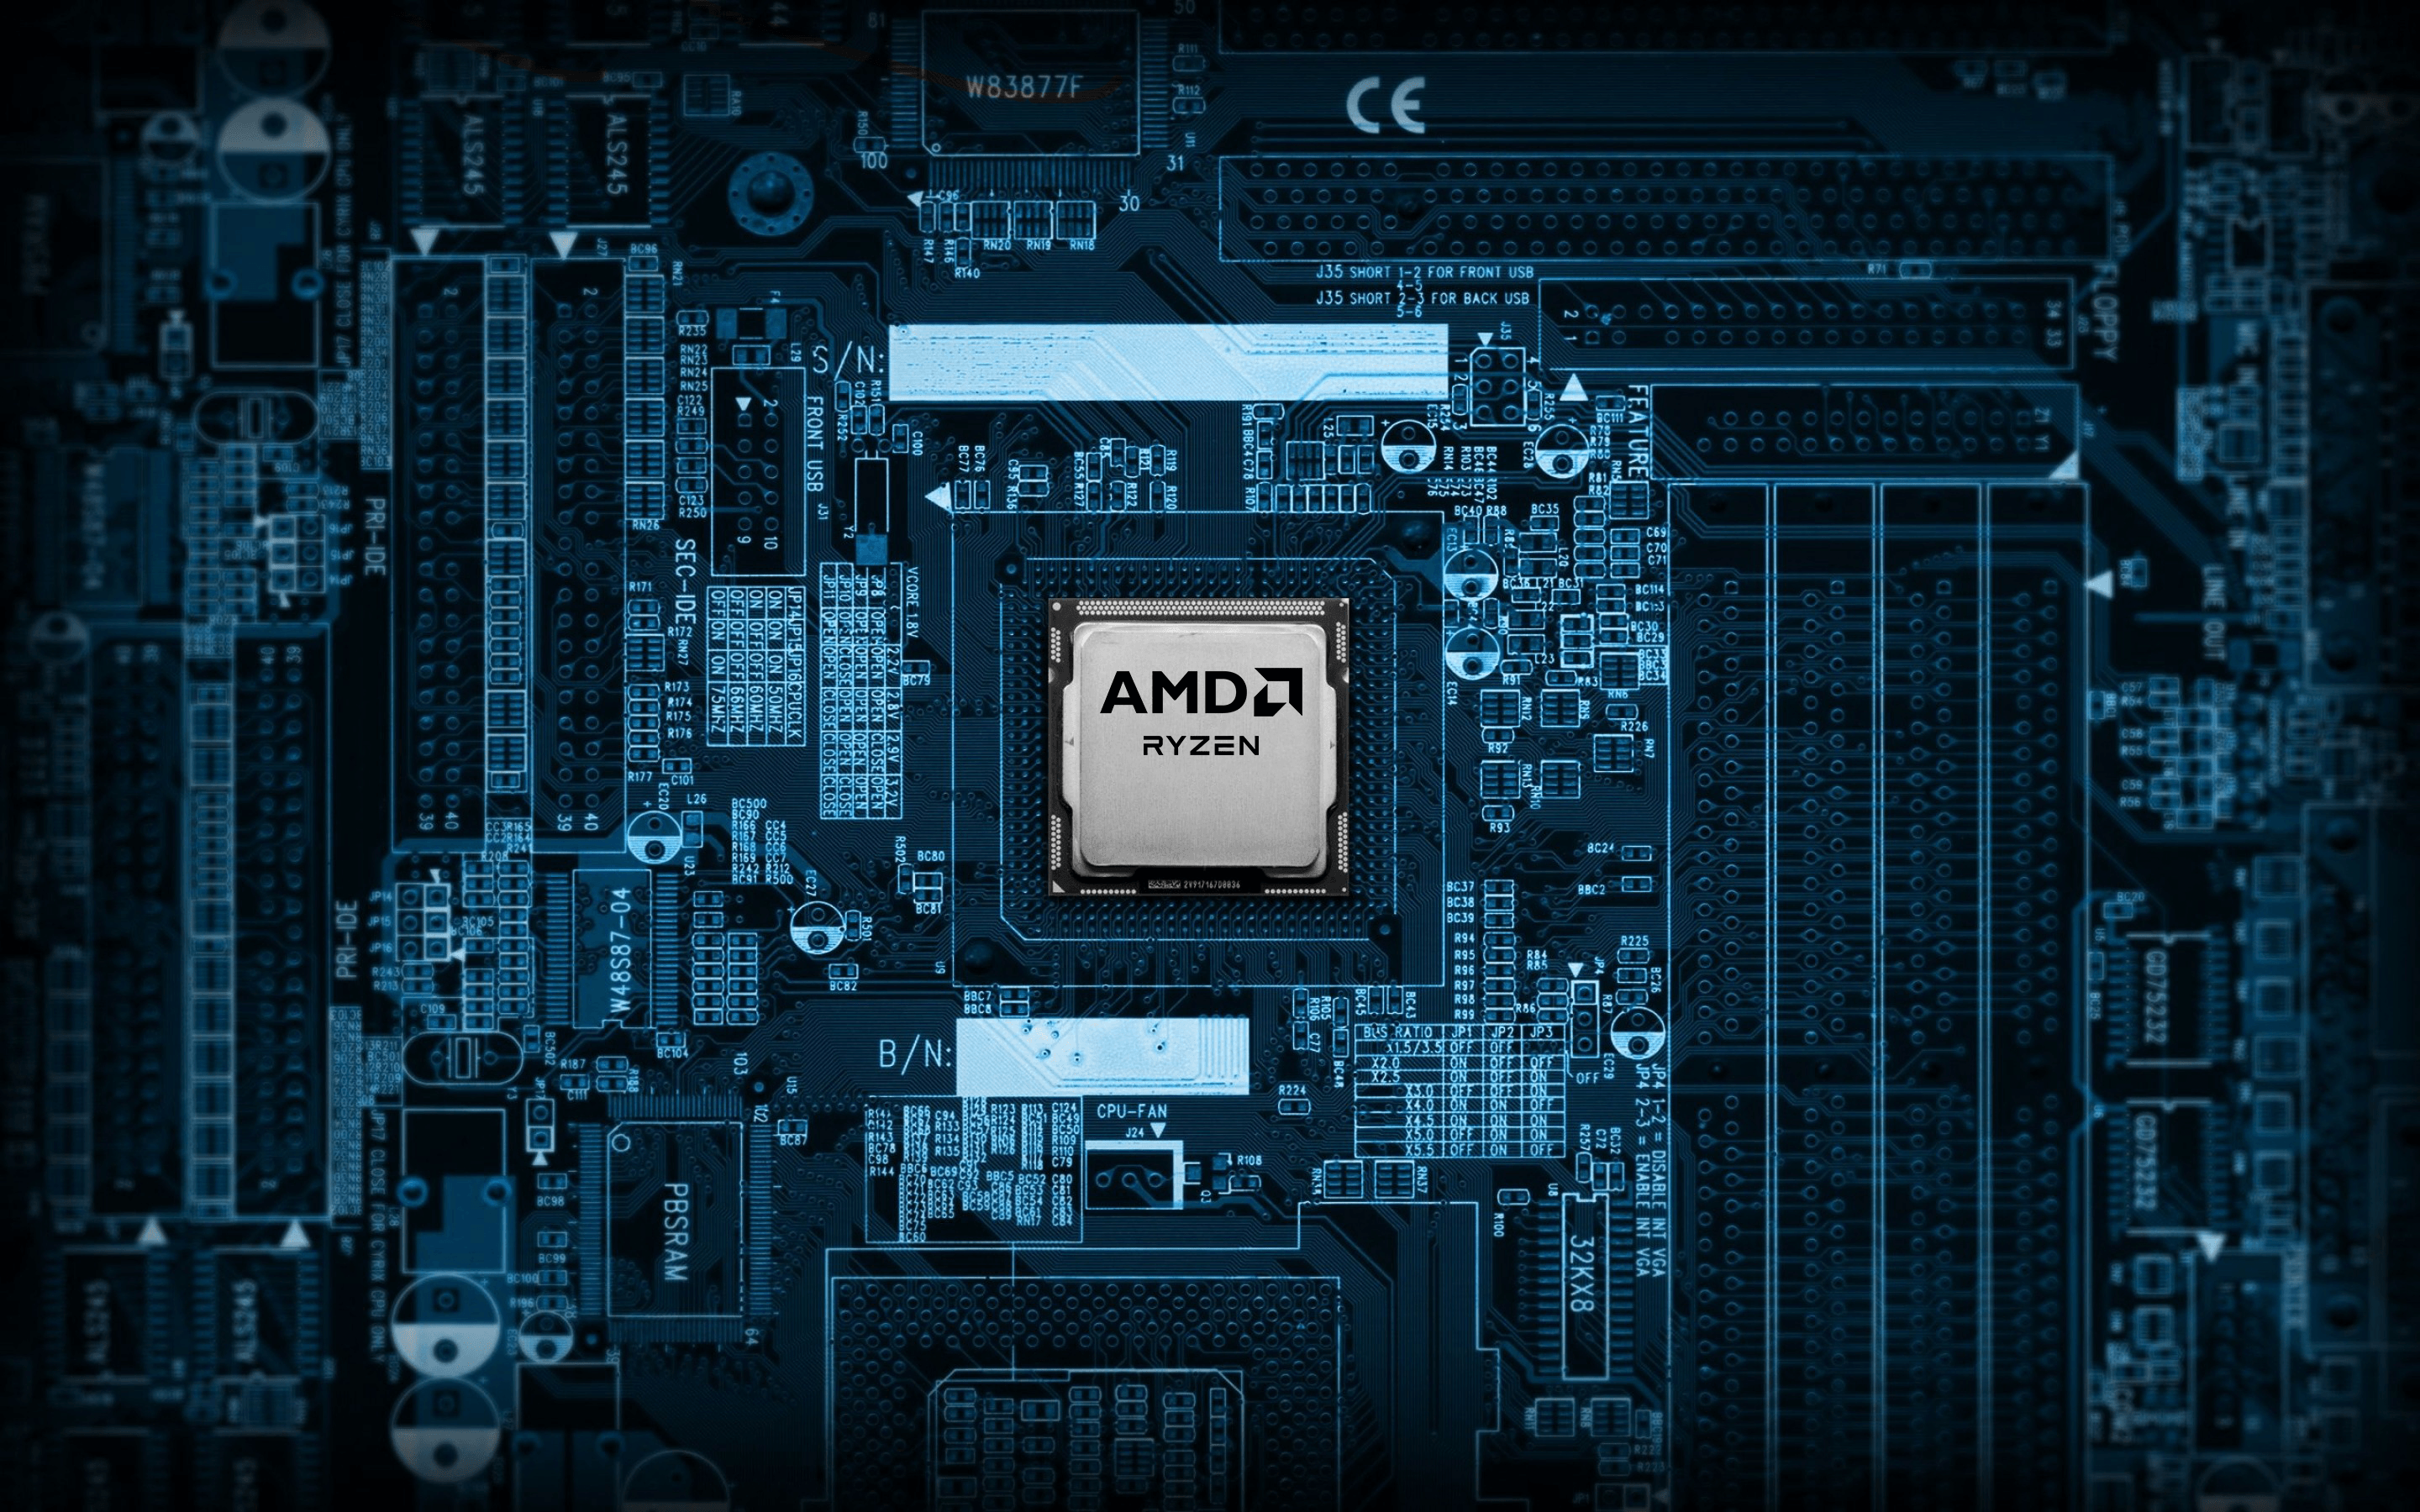 I changed this wallpaper to have the AMD Ryzen logo, thought some